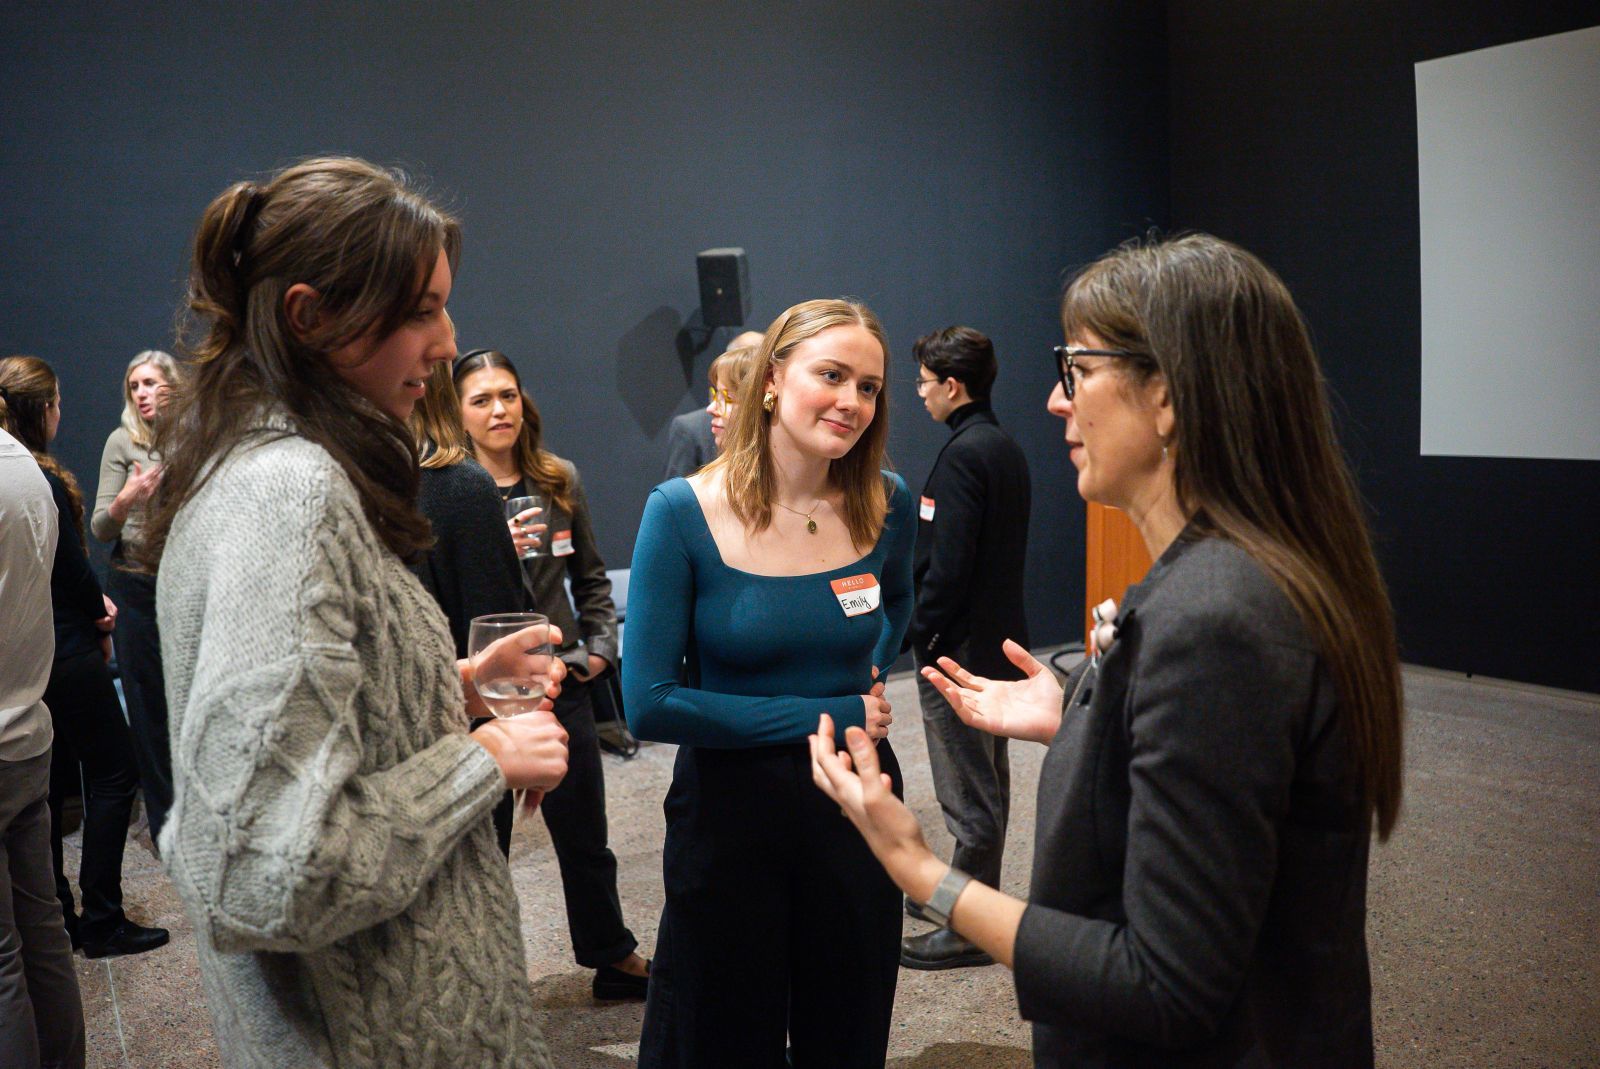 Jenn Stephenson, Associate Dean (Academic) chats with the students at the celebration event. (Photo by Jackie Li)